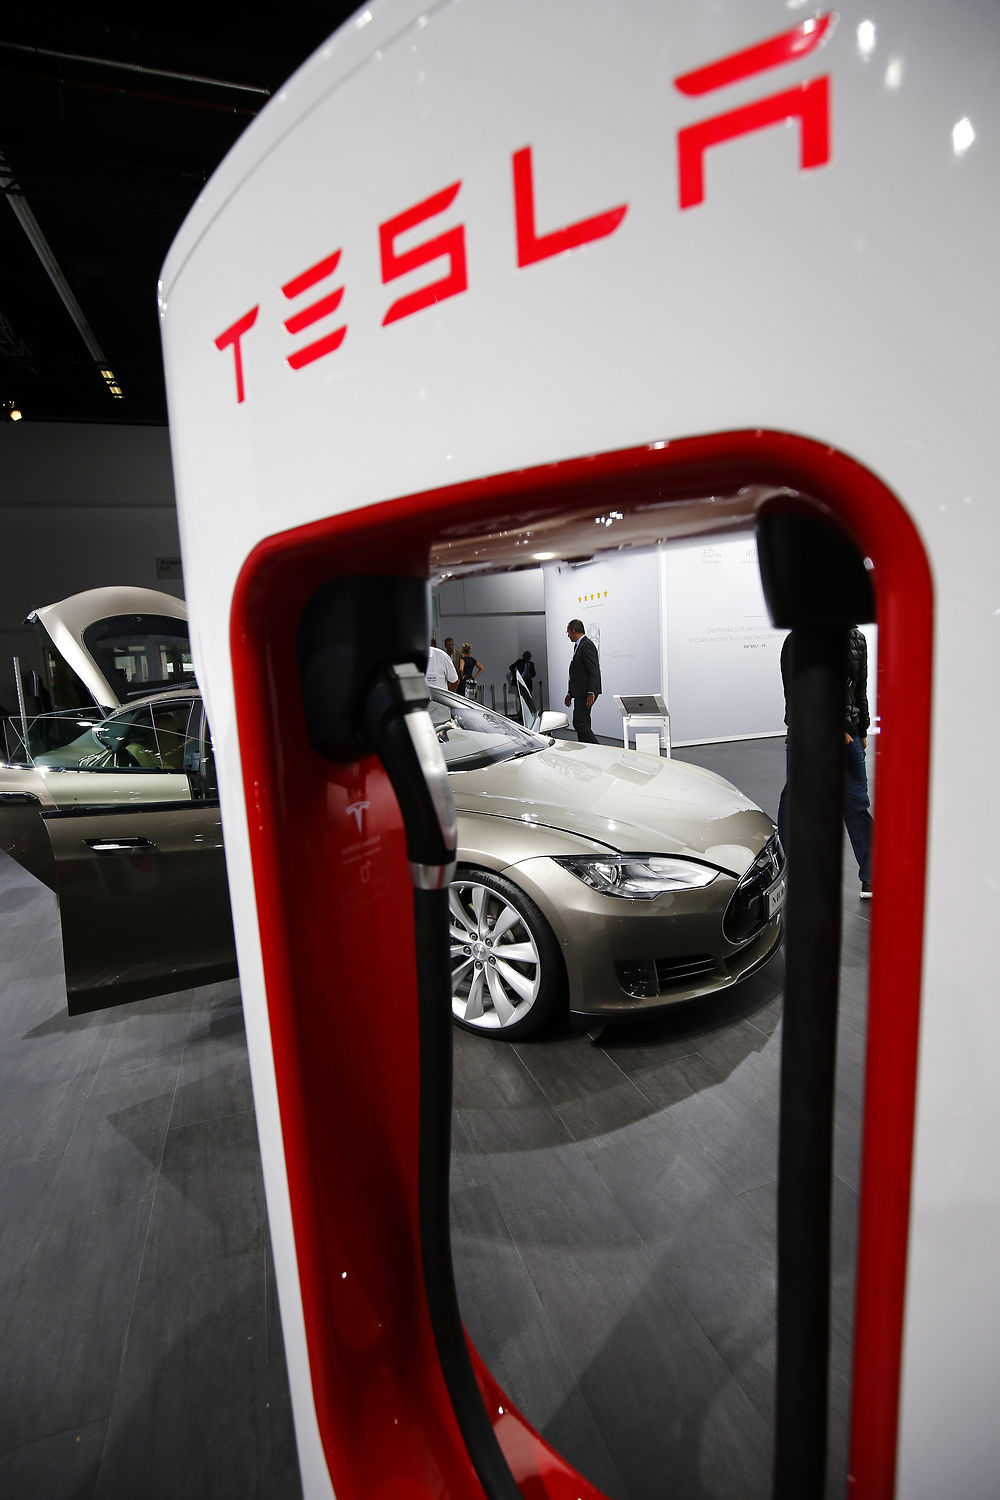 The Tesla Motors Model S is seen through a charging unit during the media day at the Frankfurt Motor Show (IAA) in Frankfurt, Germany September 16, 2015. REUTERS/Kai Pfaffenbach